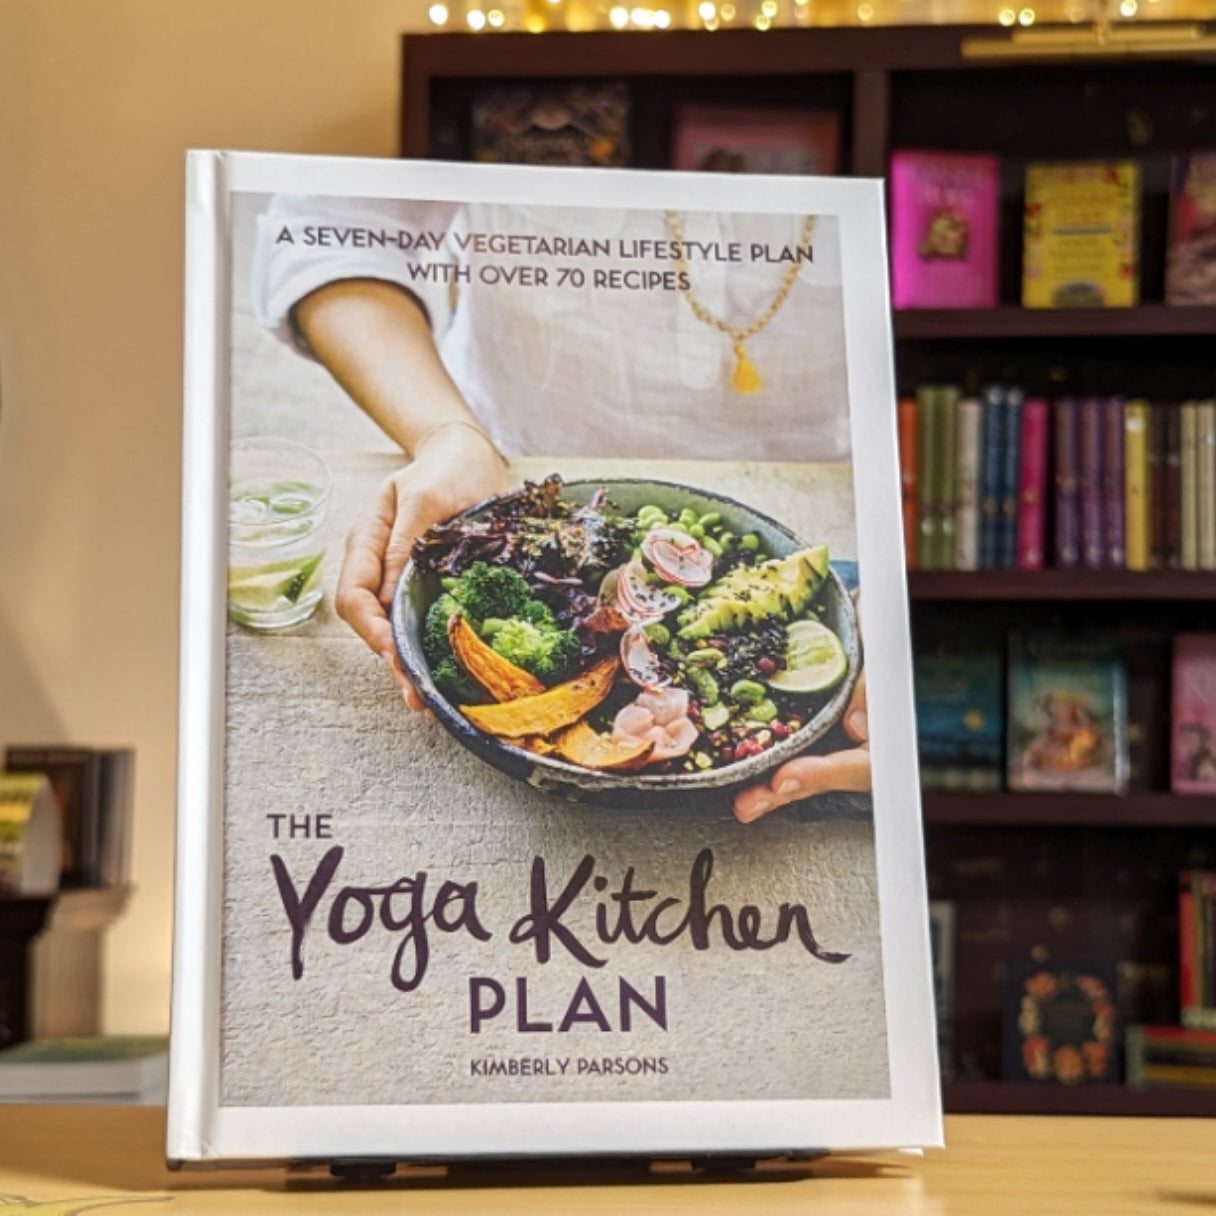 The Yoga Kitchen Plan: A Seven-Day Vegetarian Lifestyle Plan with Over 70 Recipes